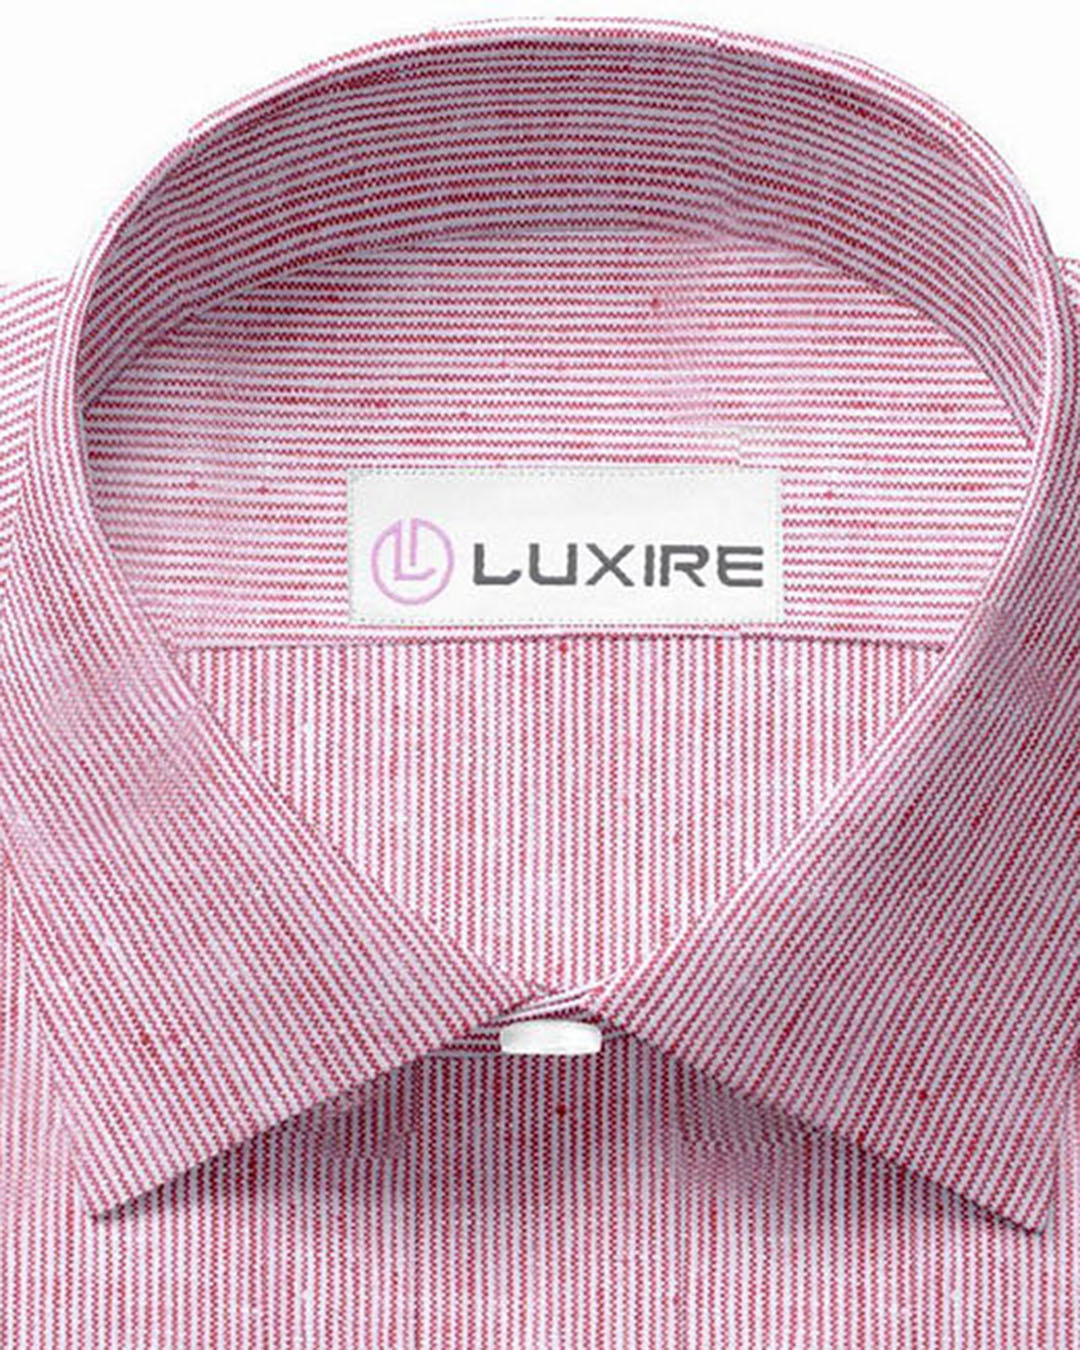 Collar of the custom linen shirt for men in red white slub by Luxire Clothing